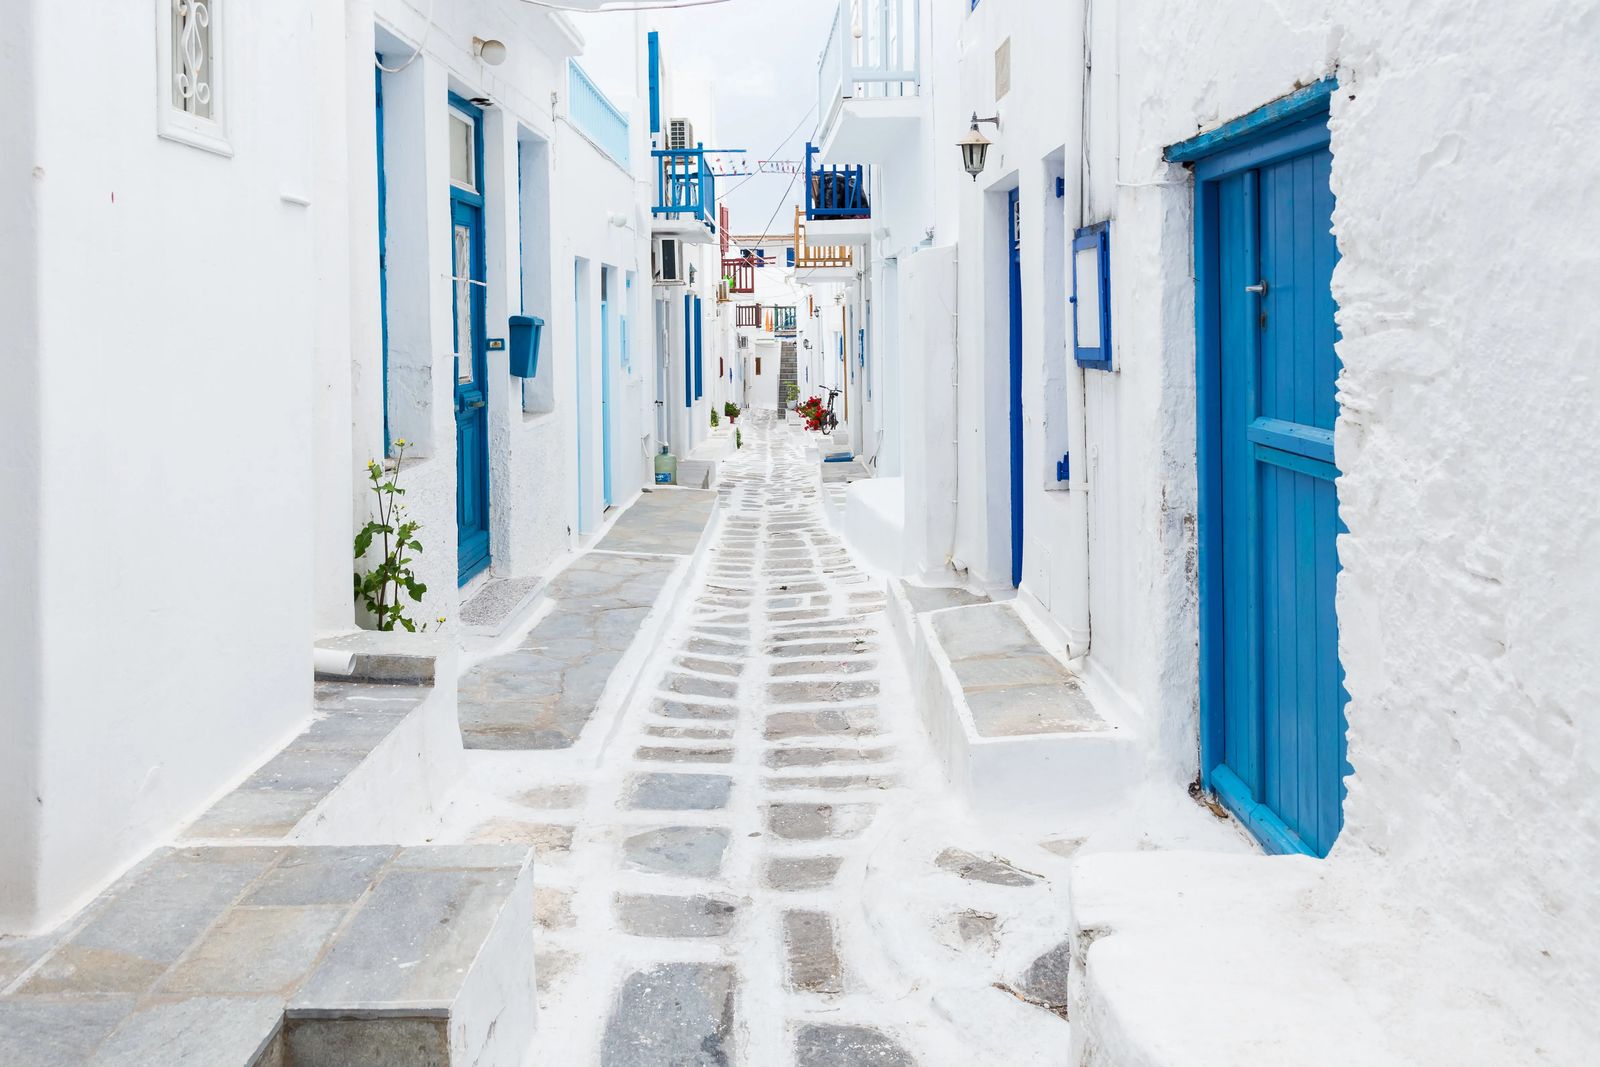 What to do in Mykonos